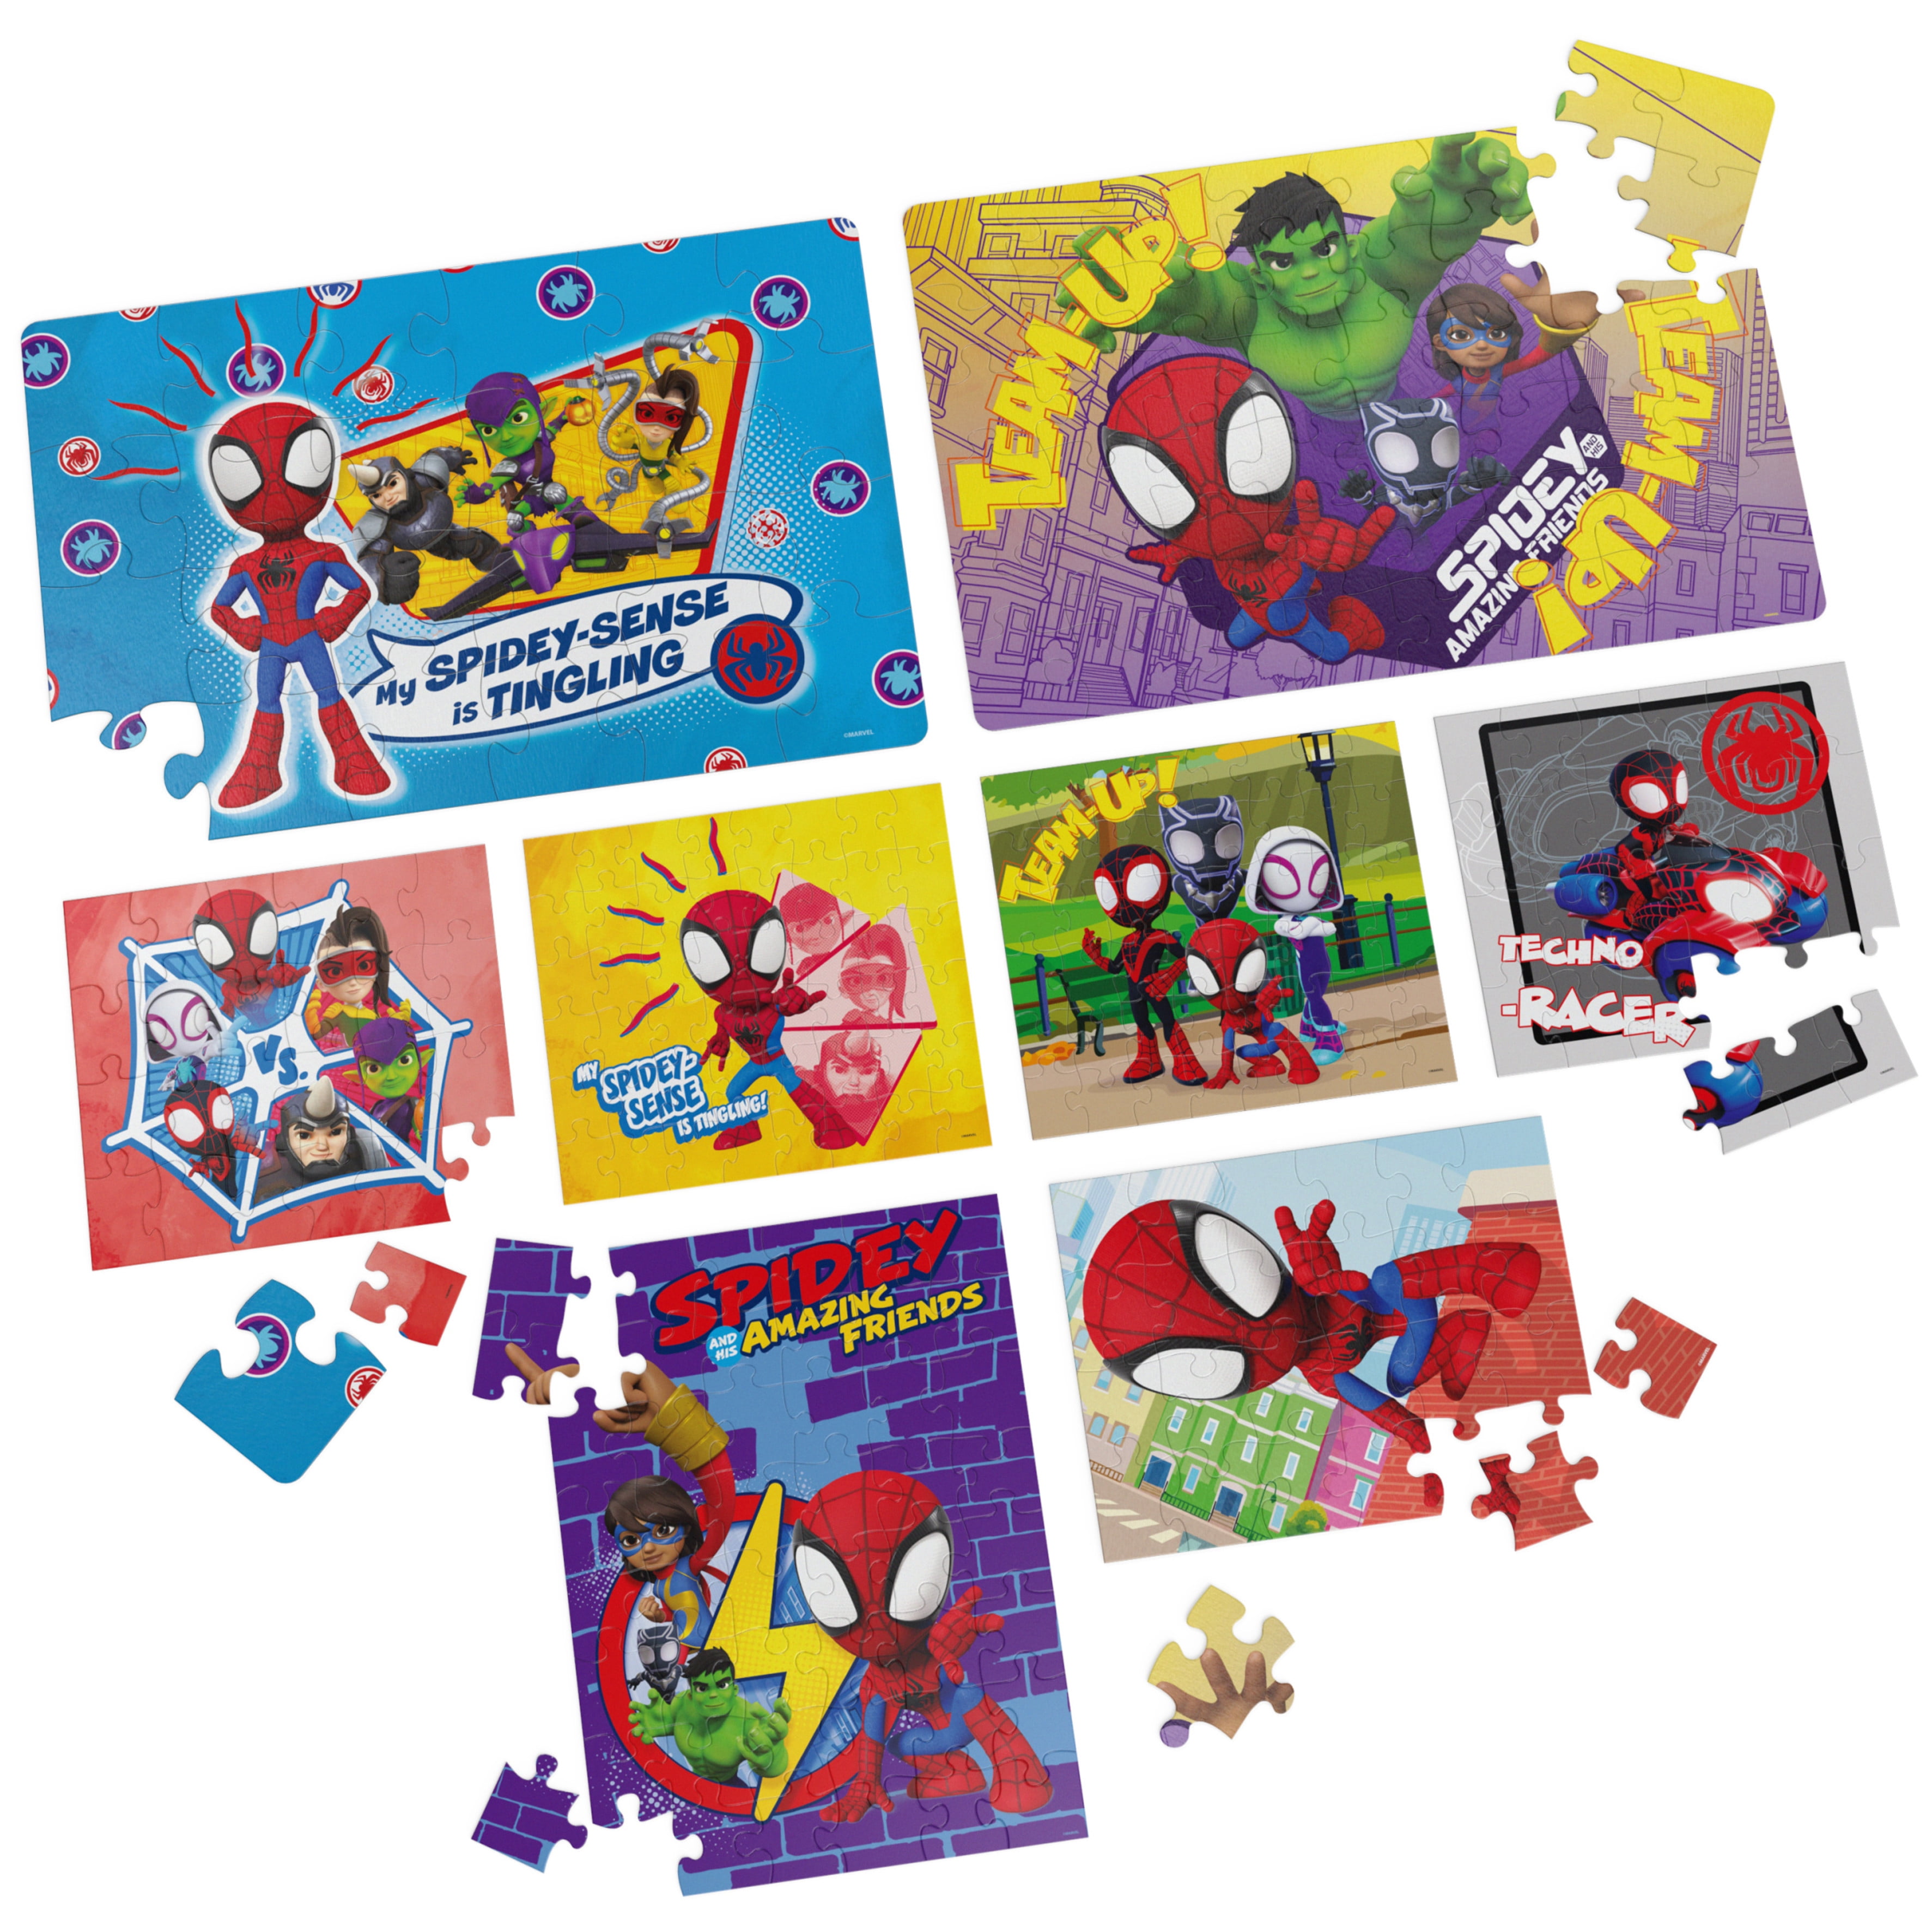 Spin Master Spidey, 8 Pack Puzzles Walmart Exclusive, for Kids Ages 4 and up